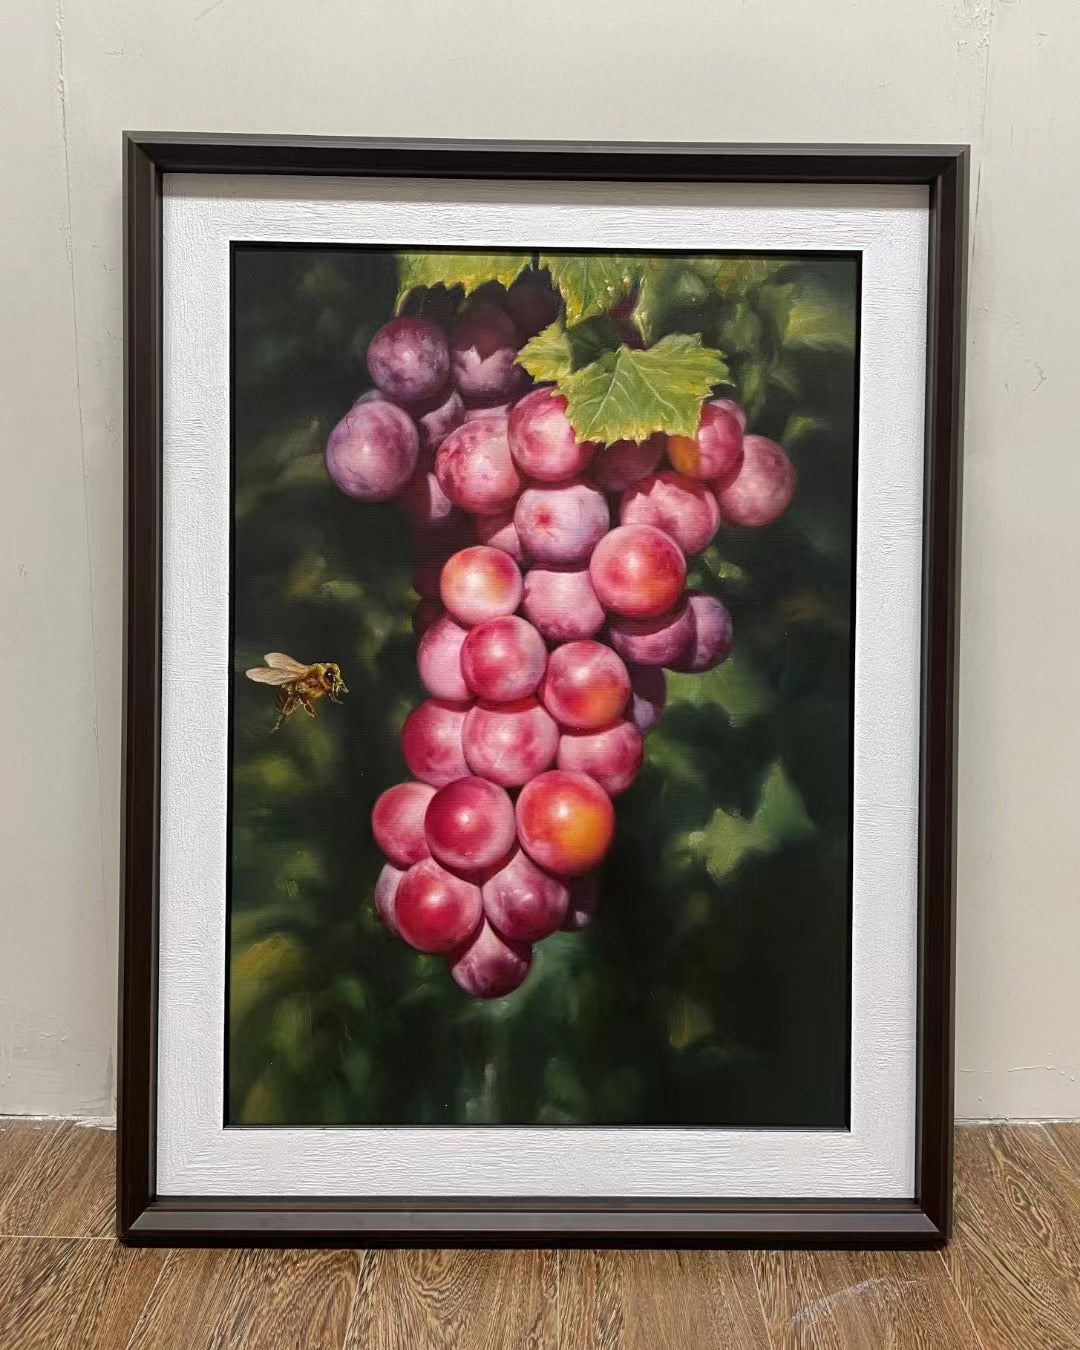 Grapes Original Oil Painting Rustic Style Fruit Artwork Photorealistic Food Still Life Painting on Canvas M2016